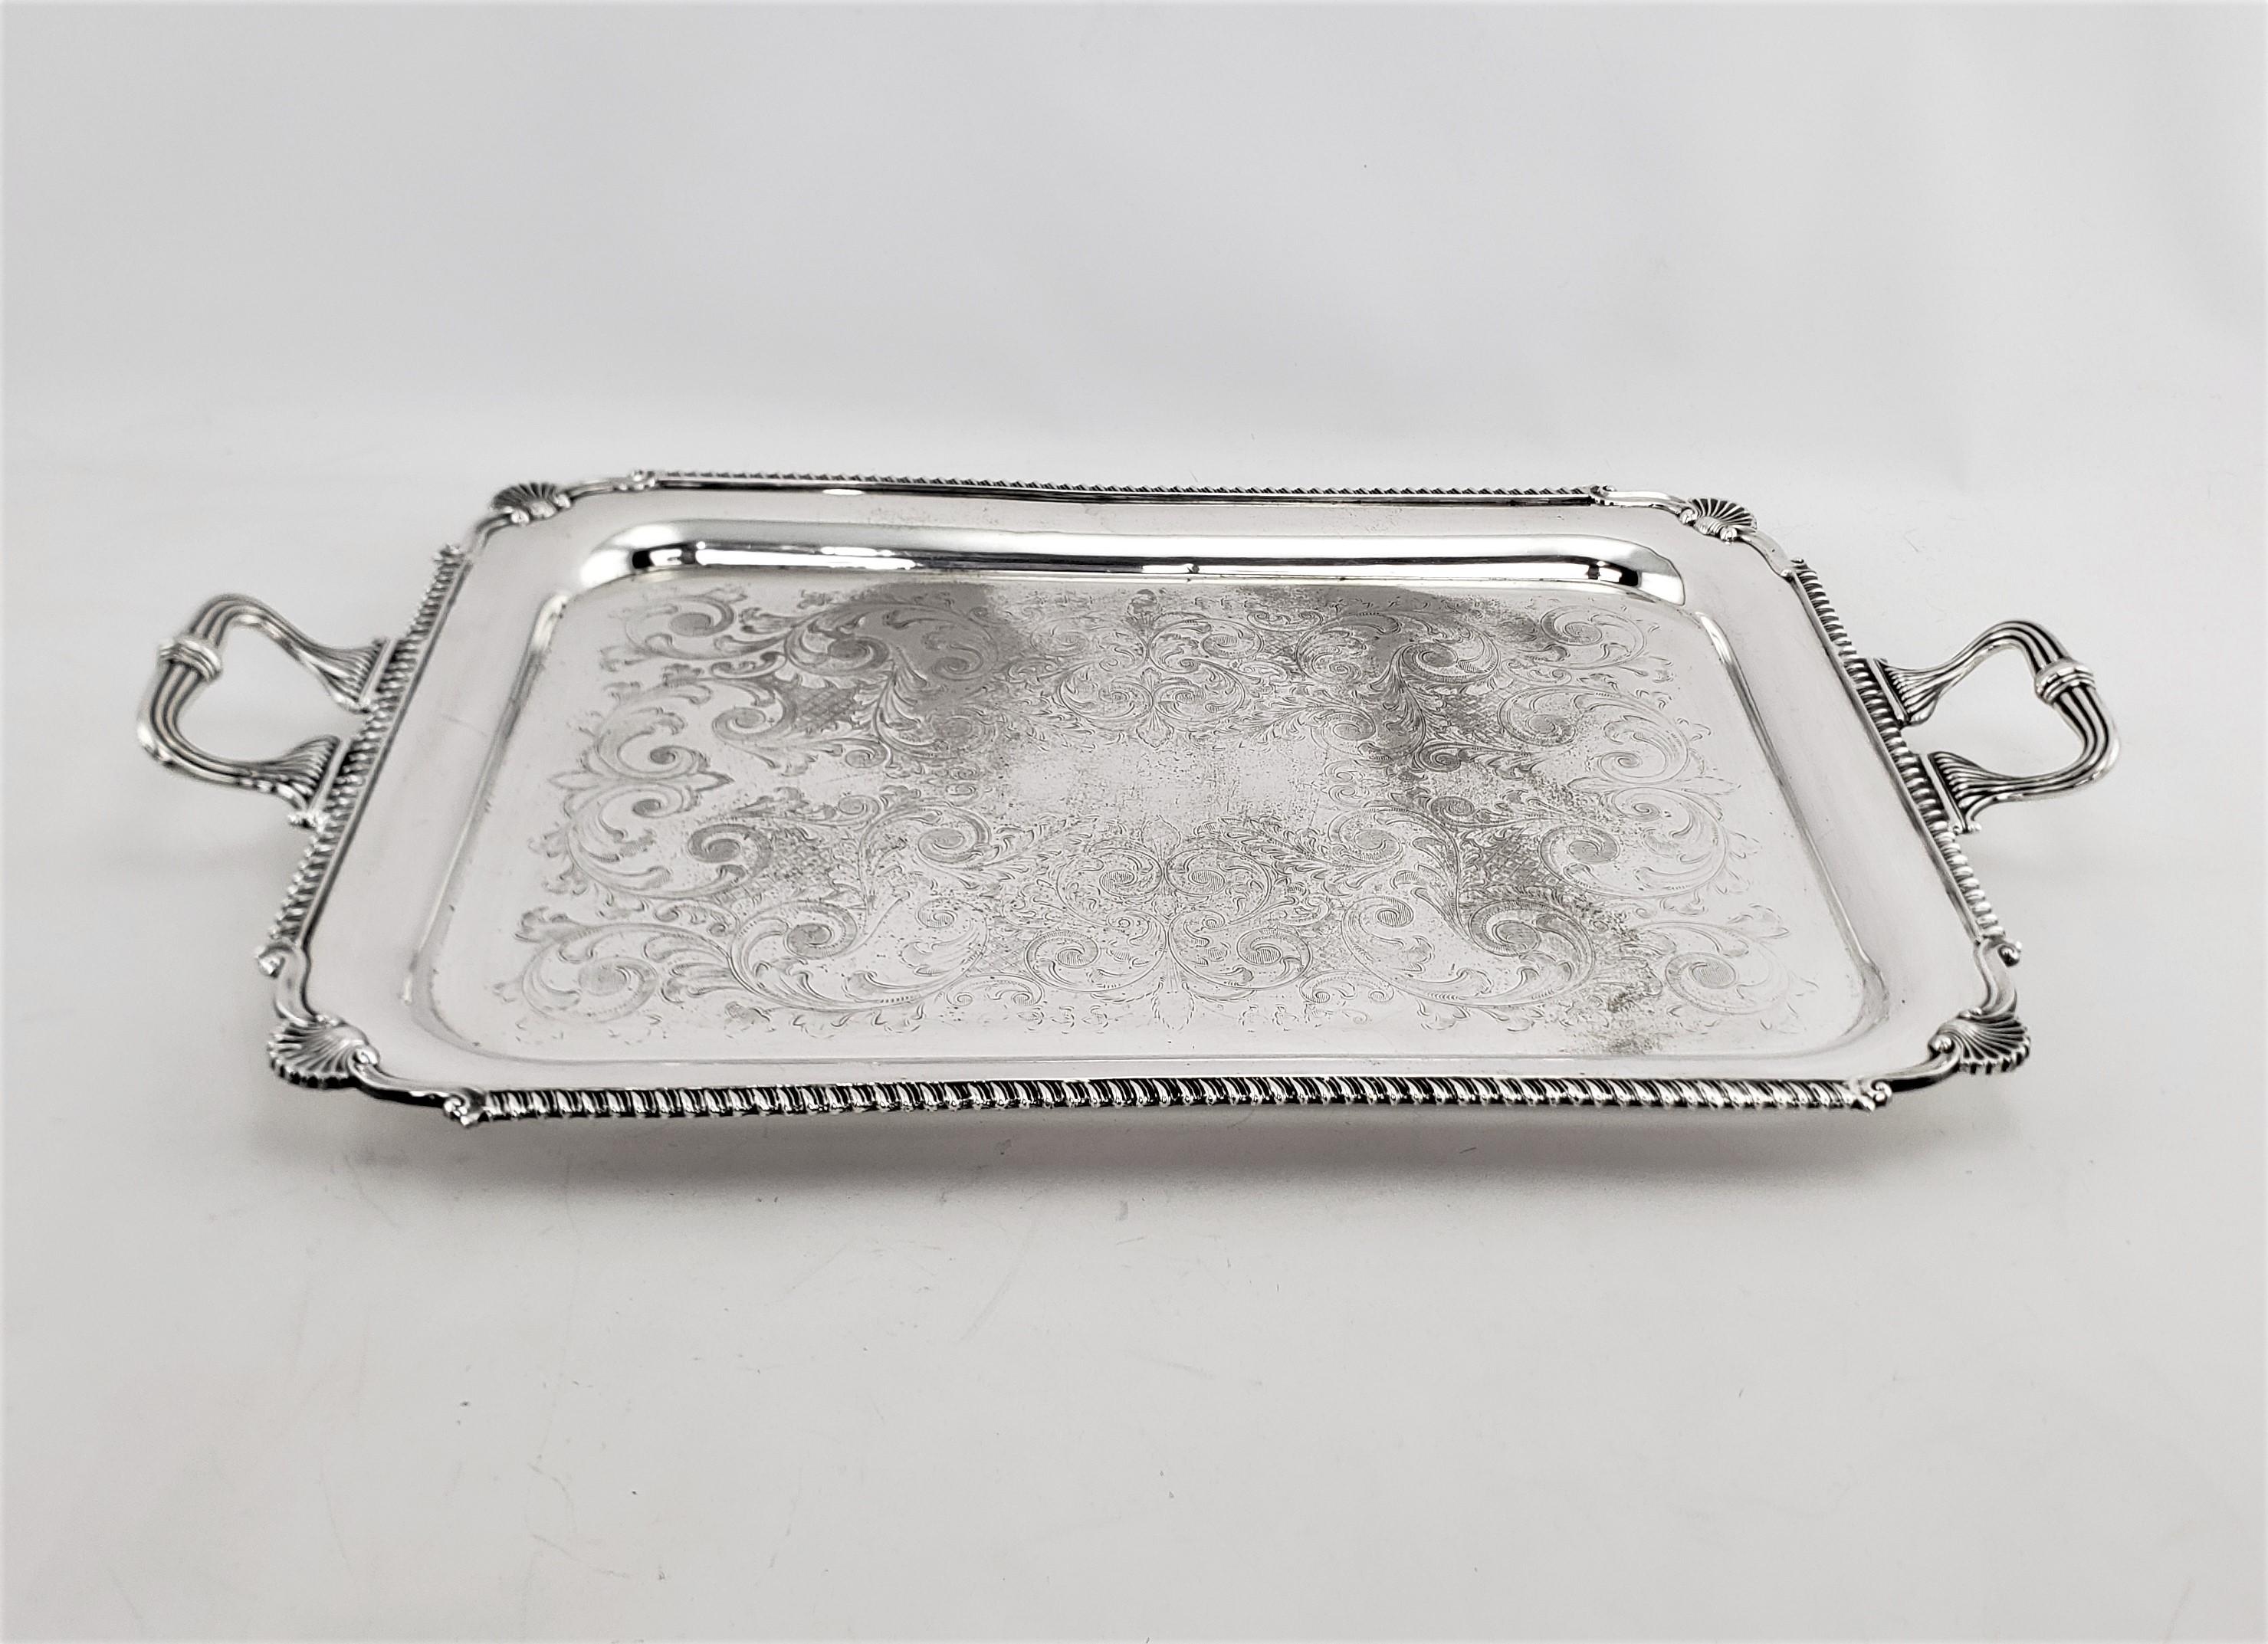 Machine-Made Large Antique English Edwardian Styled Rectangular Silver Plated Serving Tray